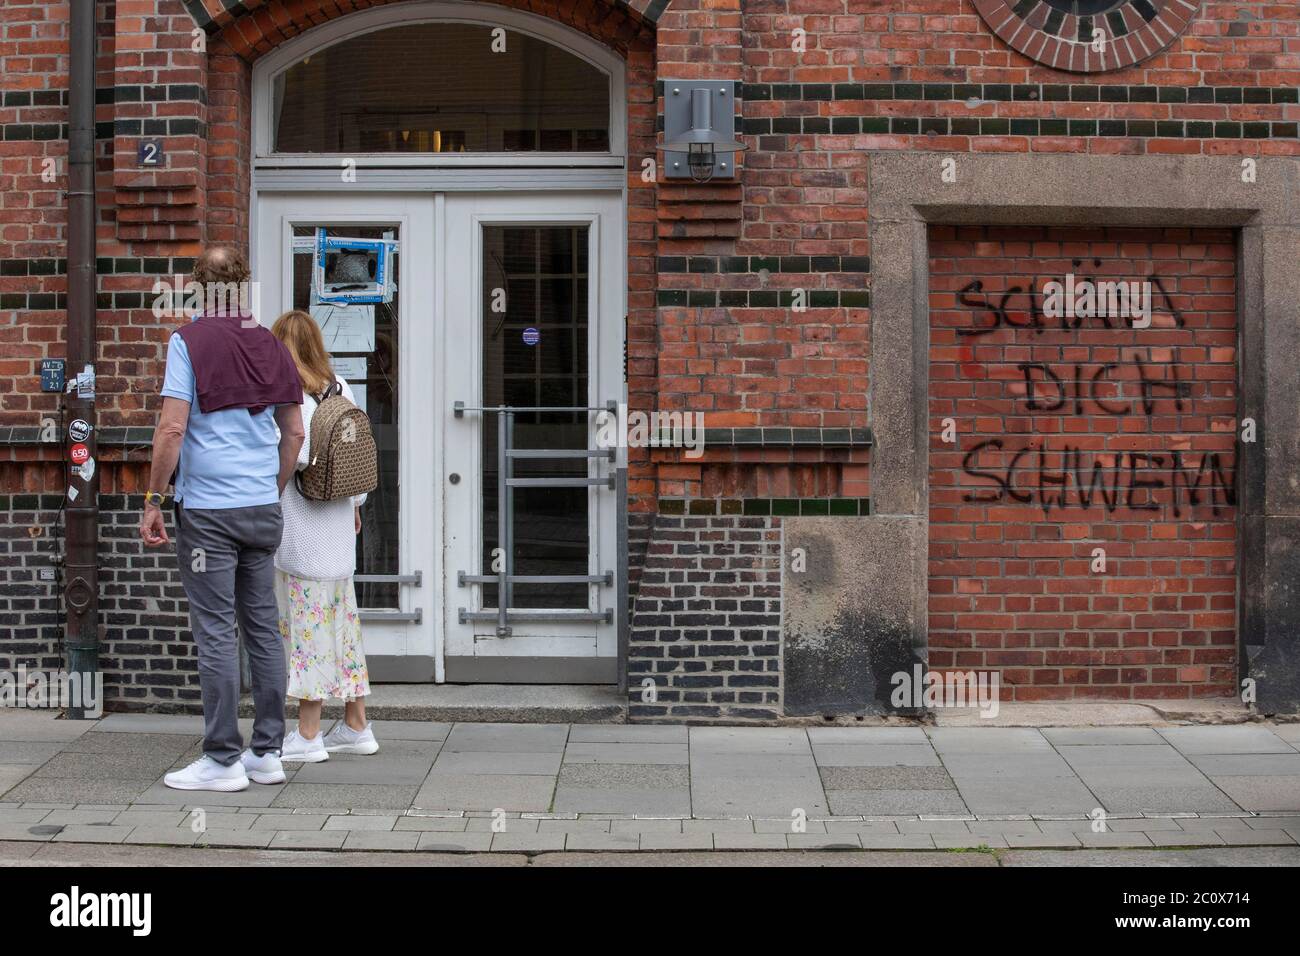 Hamburg, Germany. 12th June 2020. Picture shows a bride and groom walking past the vandalised exterior of the offices on Pickhuben in Hamburg belonging to Johann Schwenn law firm representing Christian Brueckner suspect in the disappearance of Madeleine McCann. 12th June 2020. Hamburg, Germany, Europe Stock Photo